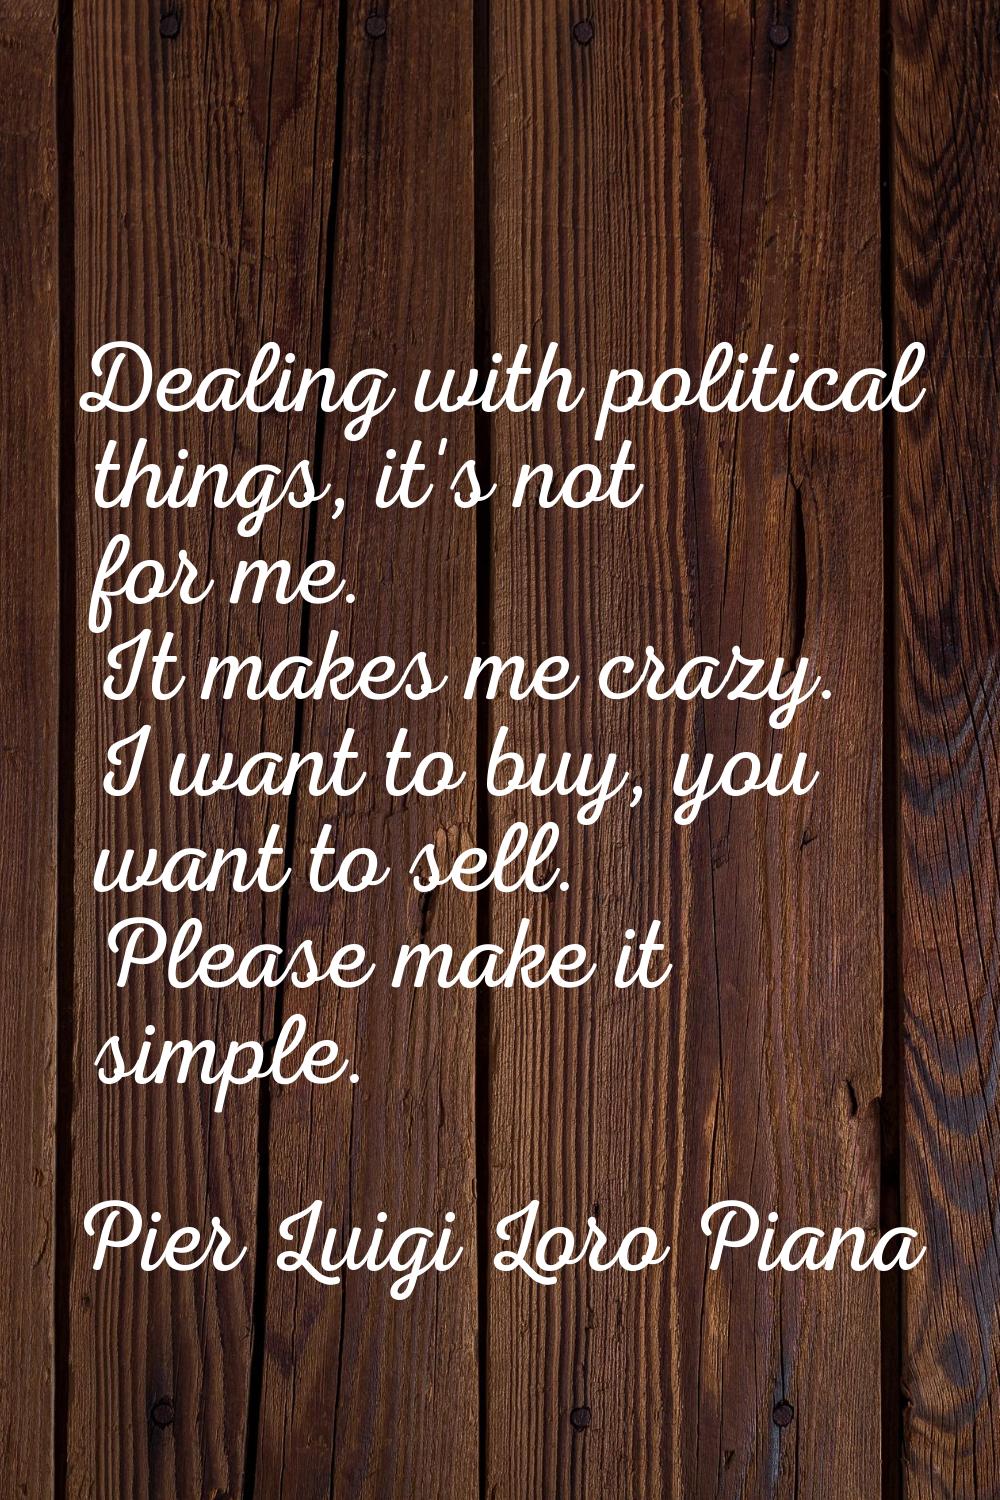 Dealing with political things, it's not for me. It makes me crazy. I want to buy, you want to sell.